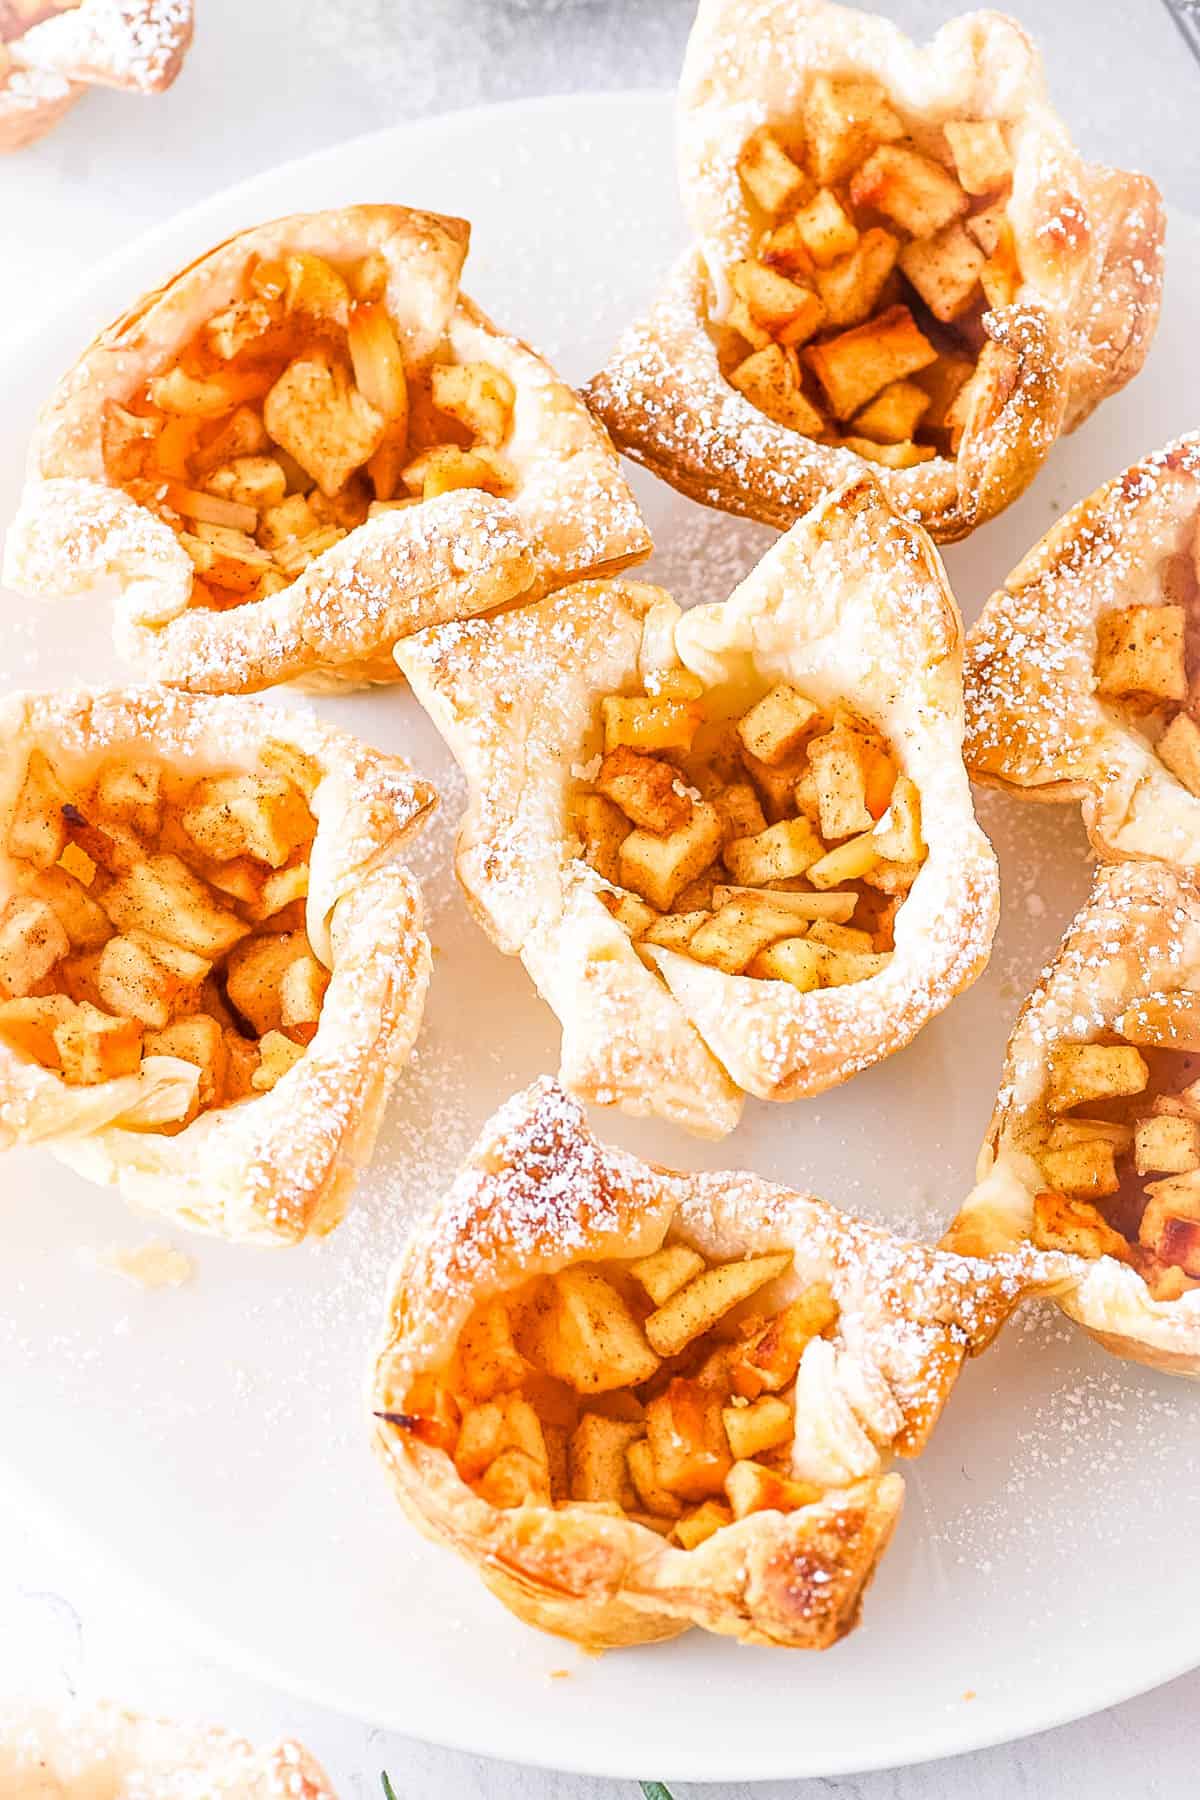 Mini apple pies dusted with confectioners sugar served on a white plate.